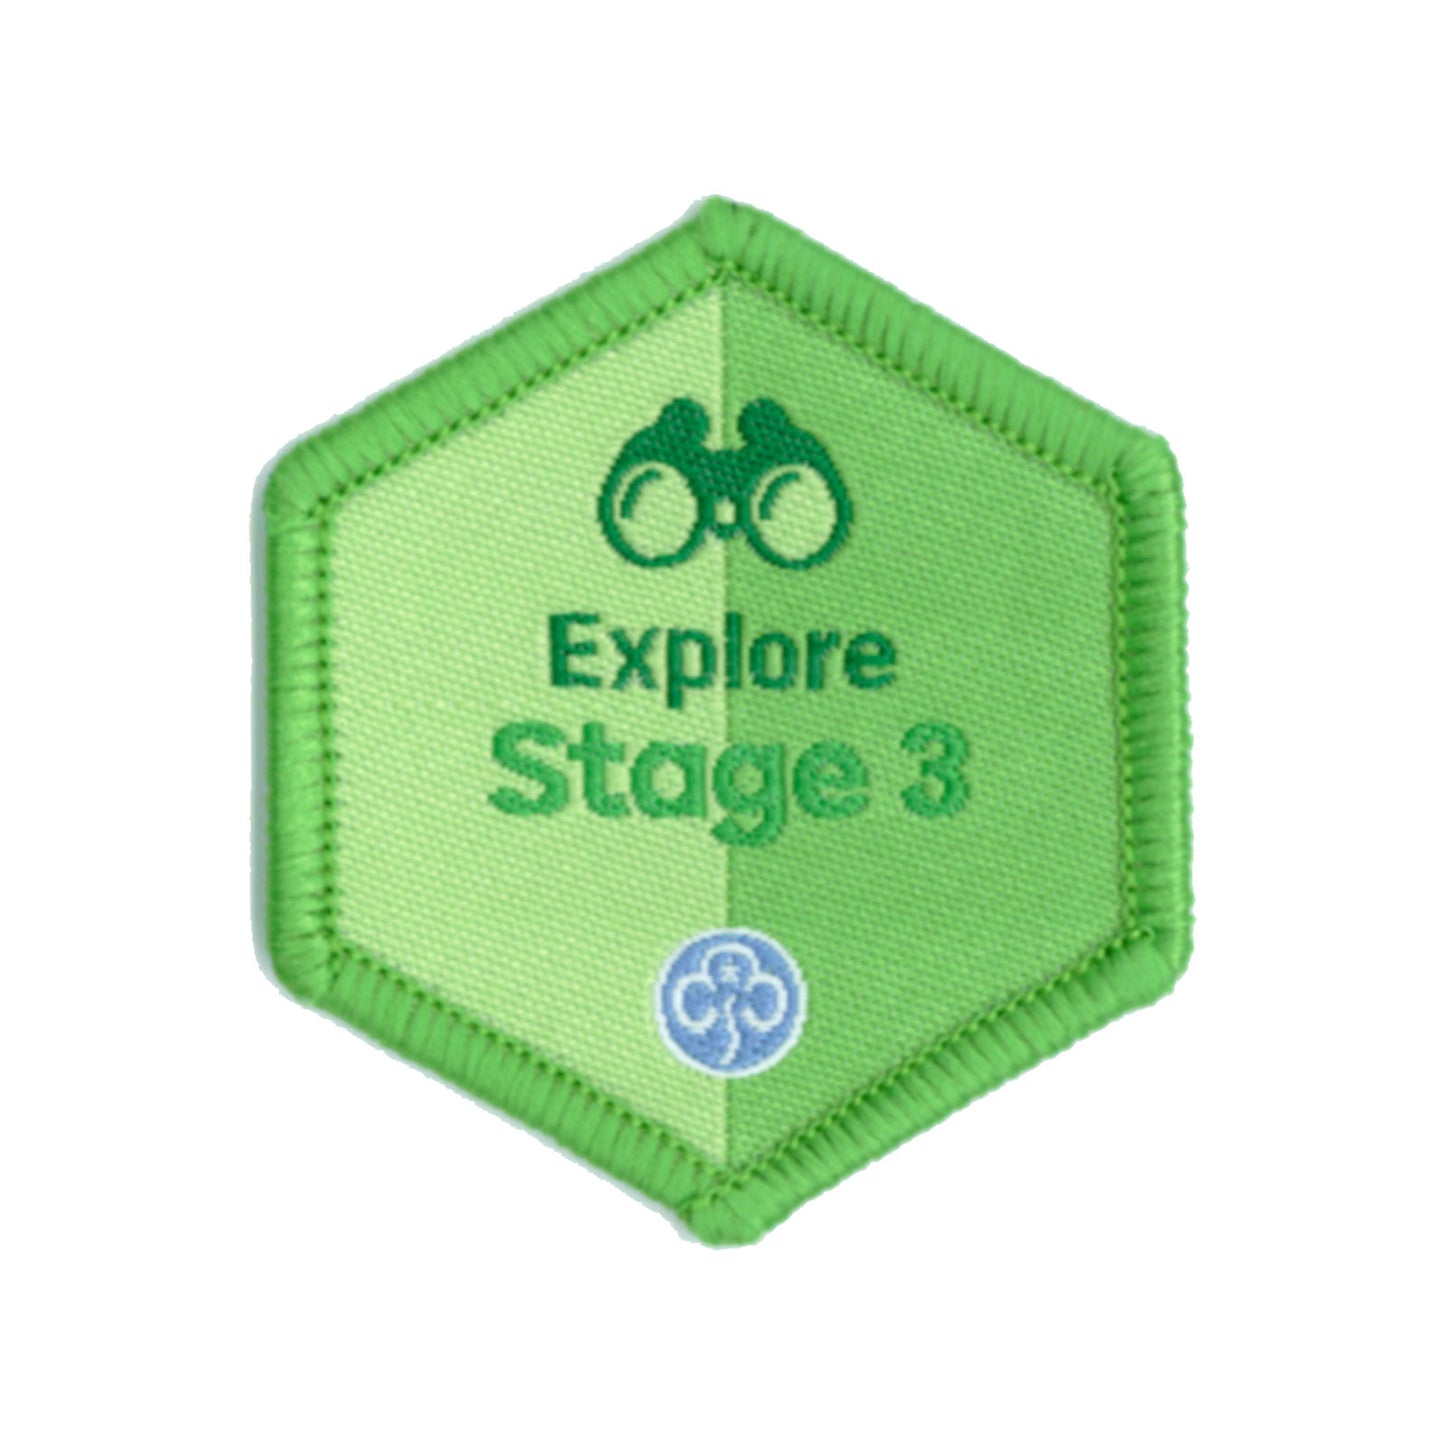 Skills Builder - Have Adventures - Explore Stage 3 Woven Badge